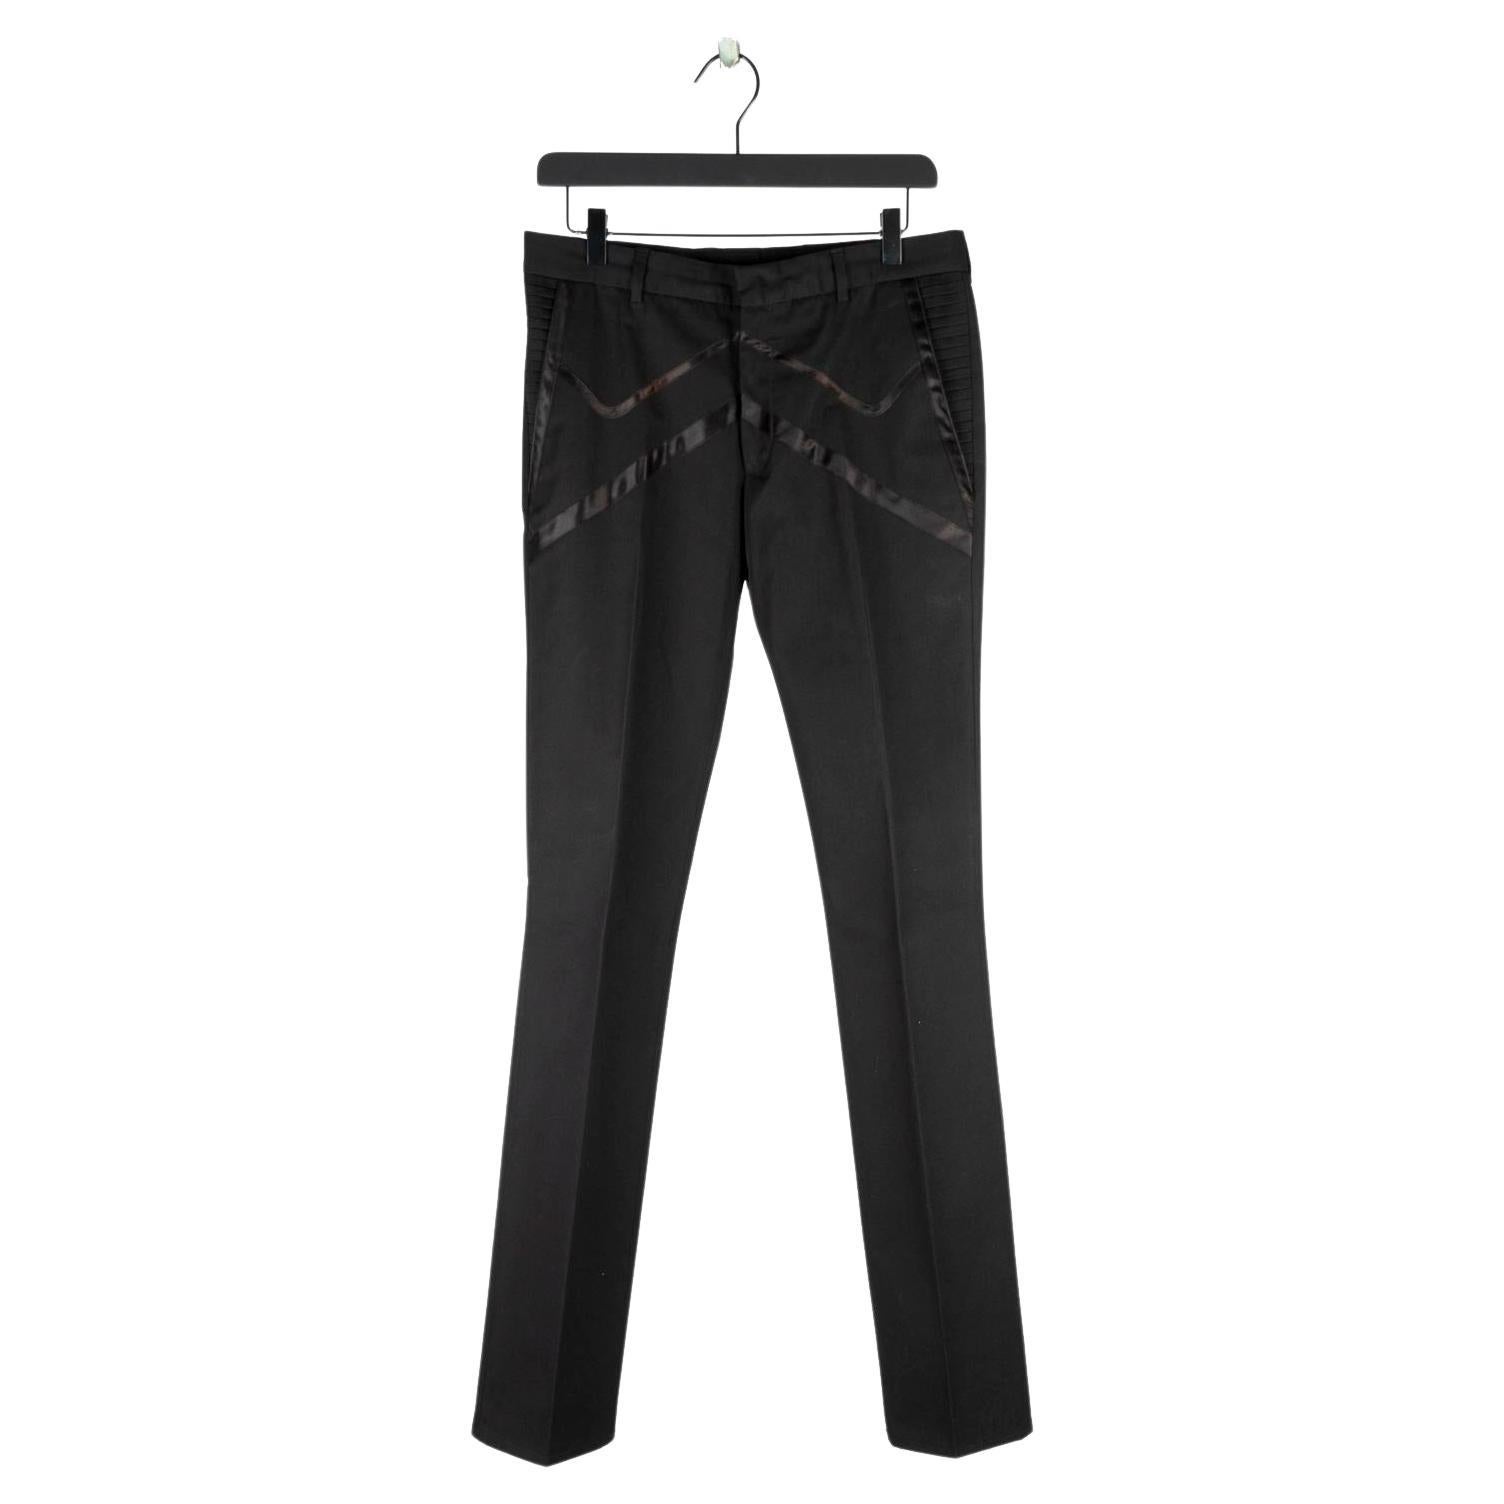 Dior Homme Men Trousers SS04 by Hedi Slimane Dress Pants, ITA Size 46 (M) For Sale